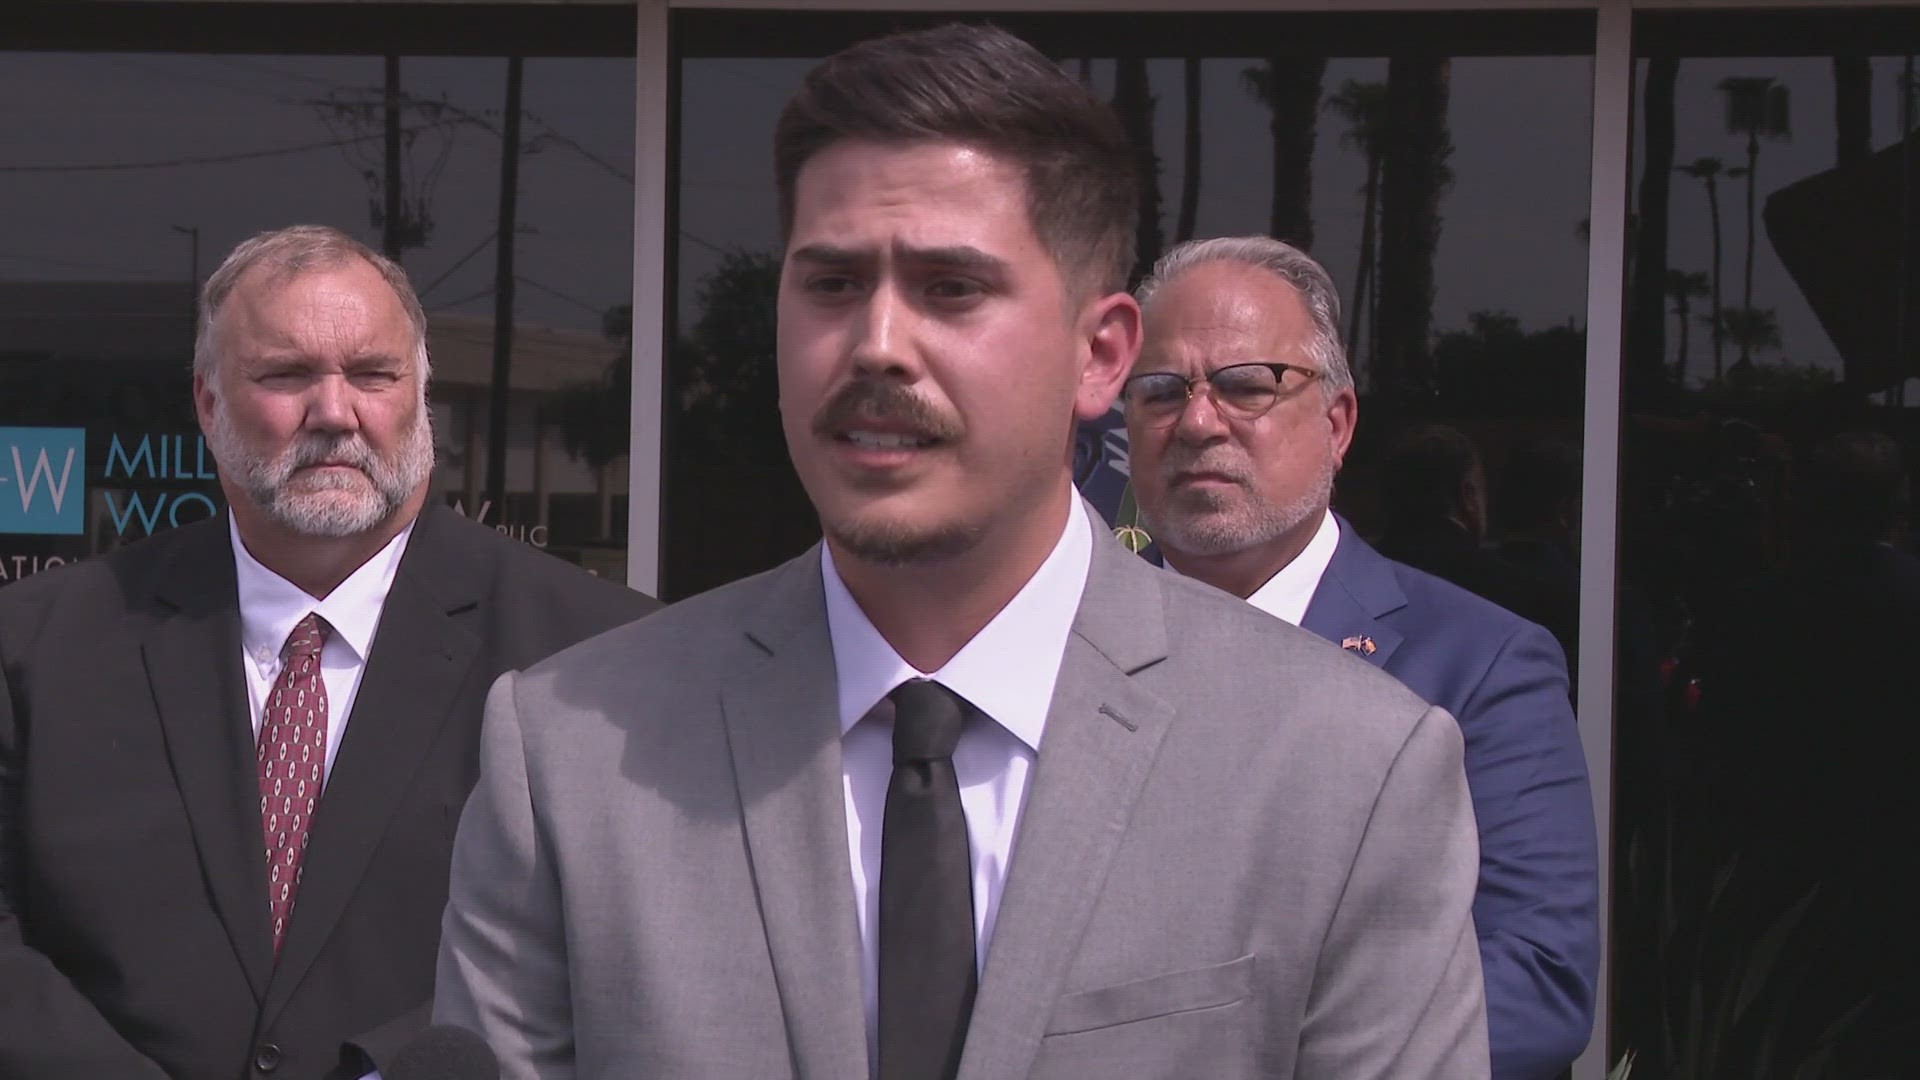 Sean Pena and his lawyers have named a multitude of defendants in his lawsuit, including the City of Phoenix, Maricopa County and a former Phoenix chief of police.